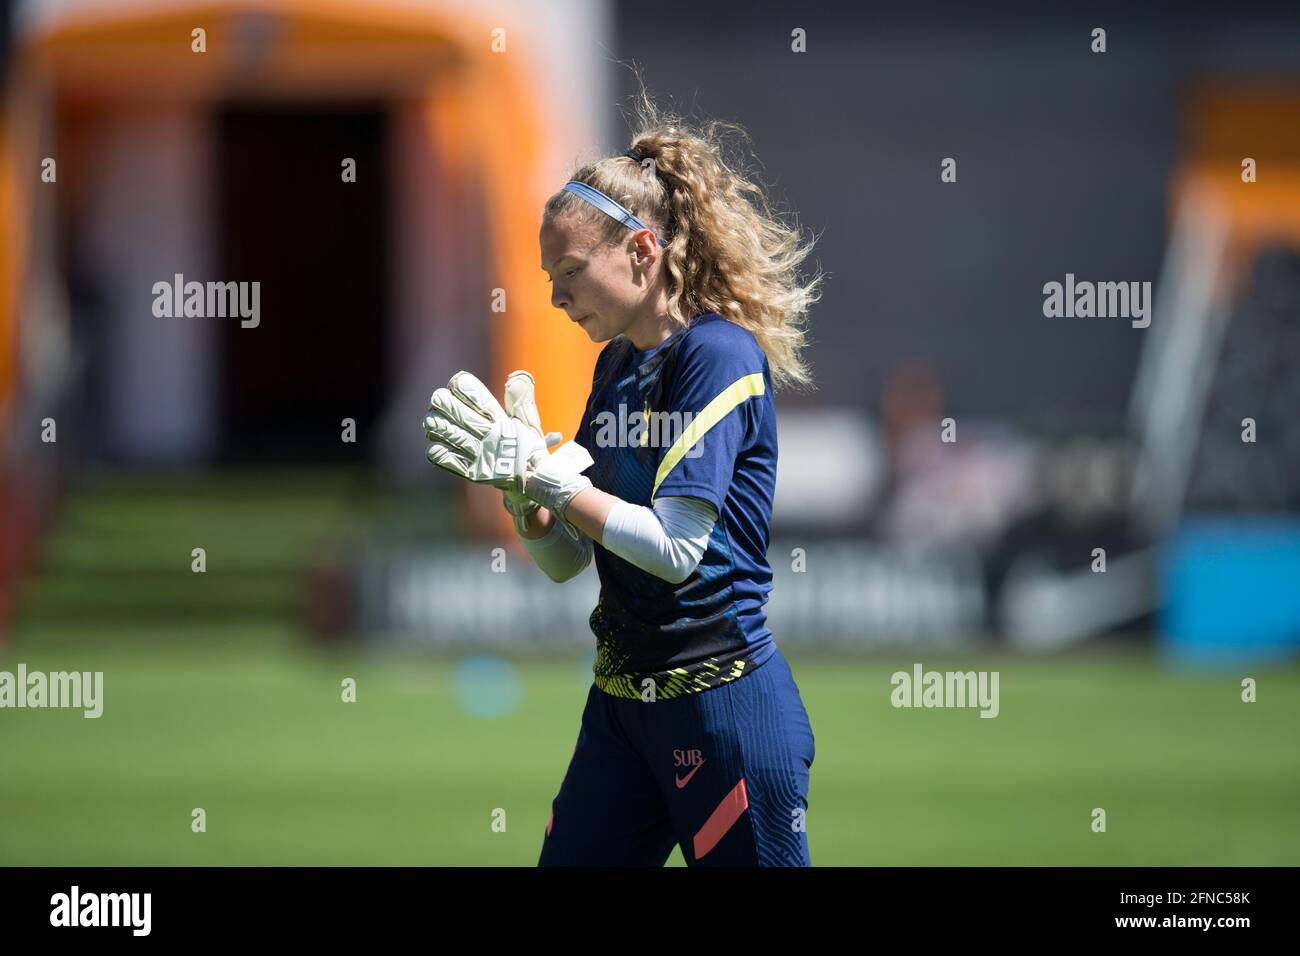 London, UK. 16th May, 2021. London, UK. May 2nd : Tottenham Hotspur squad warms up during the 2020-21 FA Women's Cup fixture between Tottenham Hotspur and Sheffield United at The Hive. Credit: Federico Guerra Morán/Alamy Live News Stock Photo